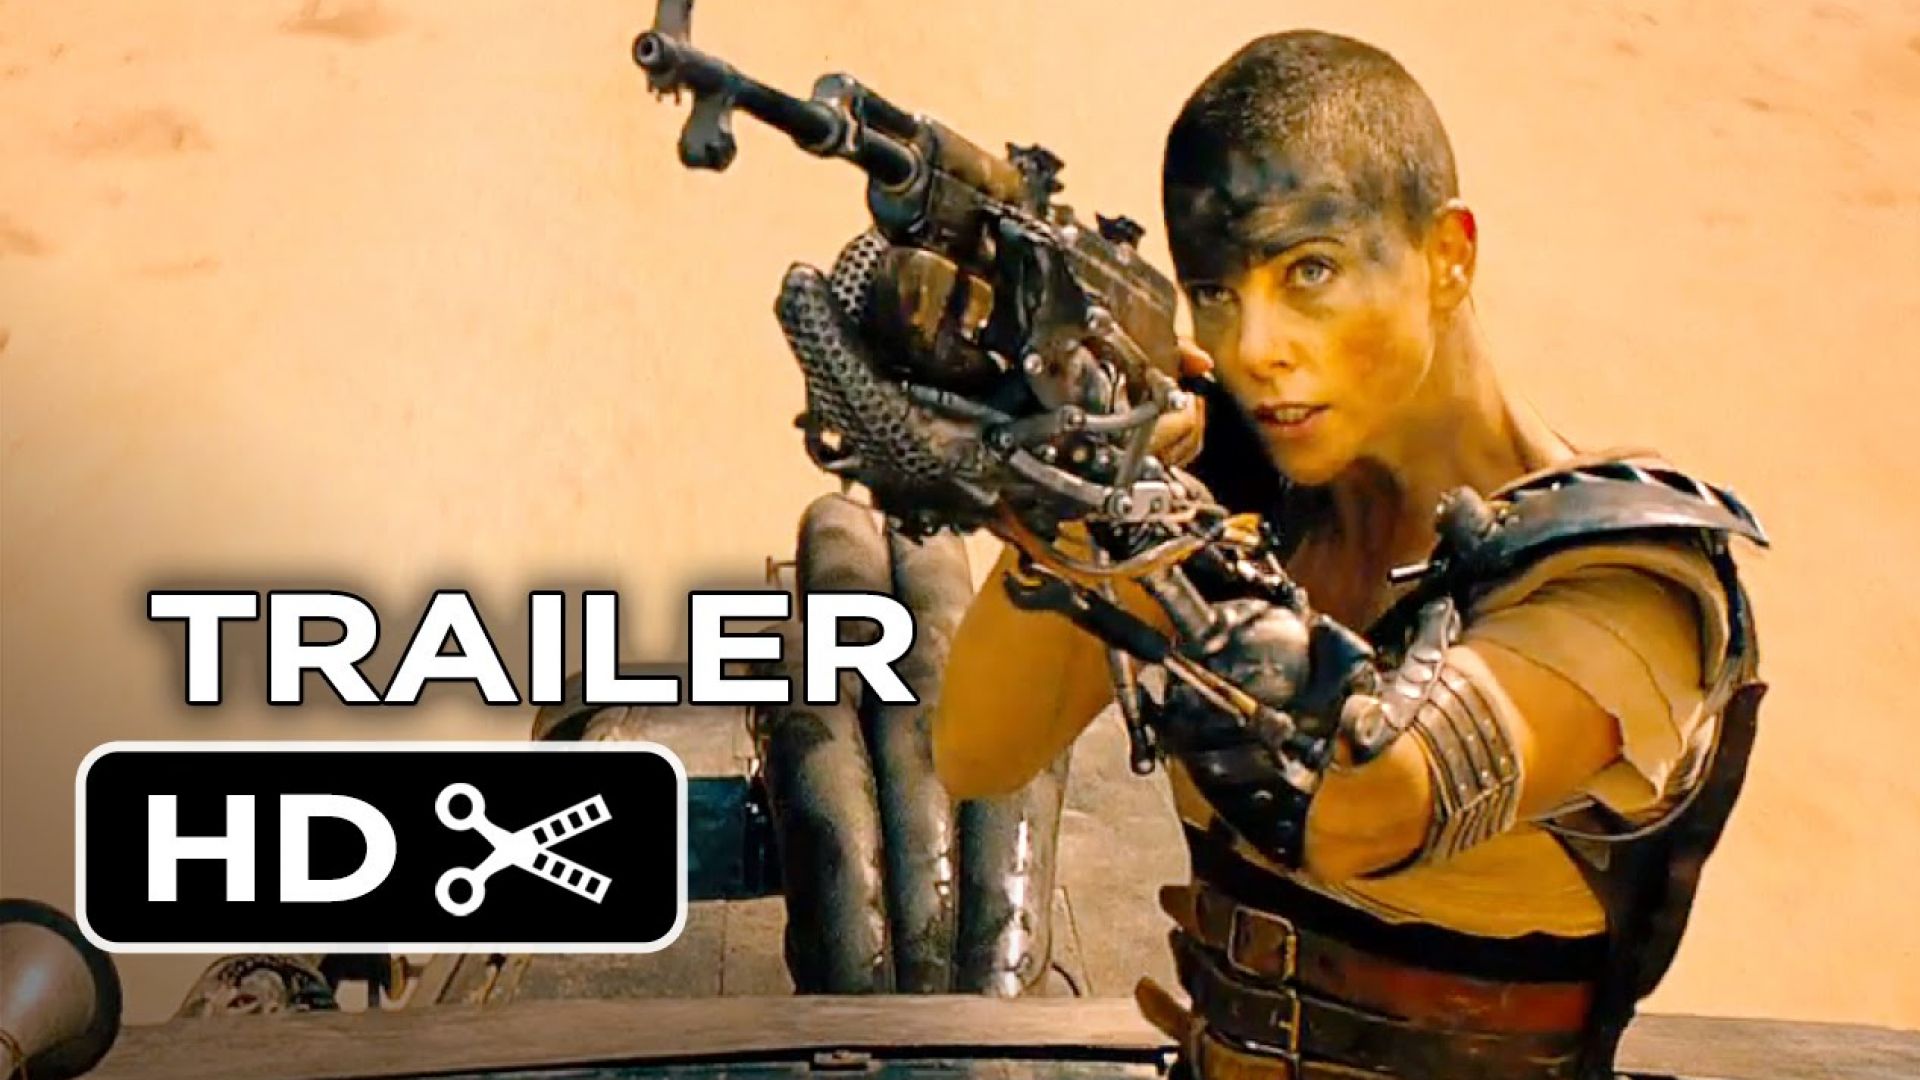 What a Lovely Day in Final Trailer for &#039;Mad Max: Fury Road&#039;